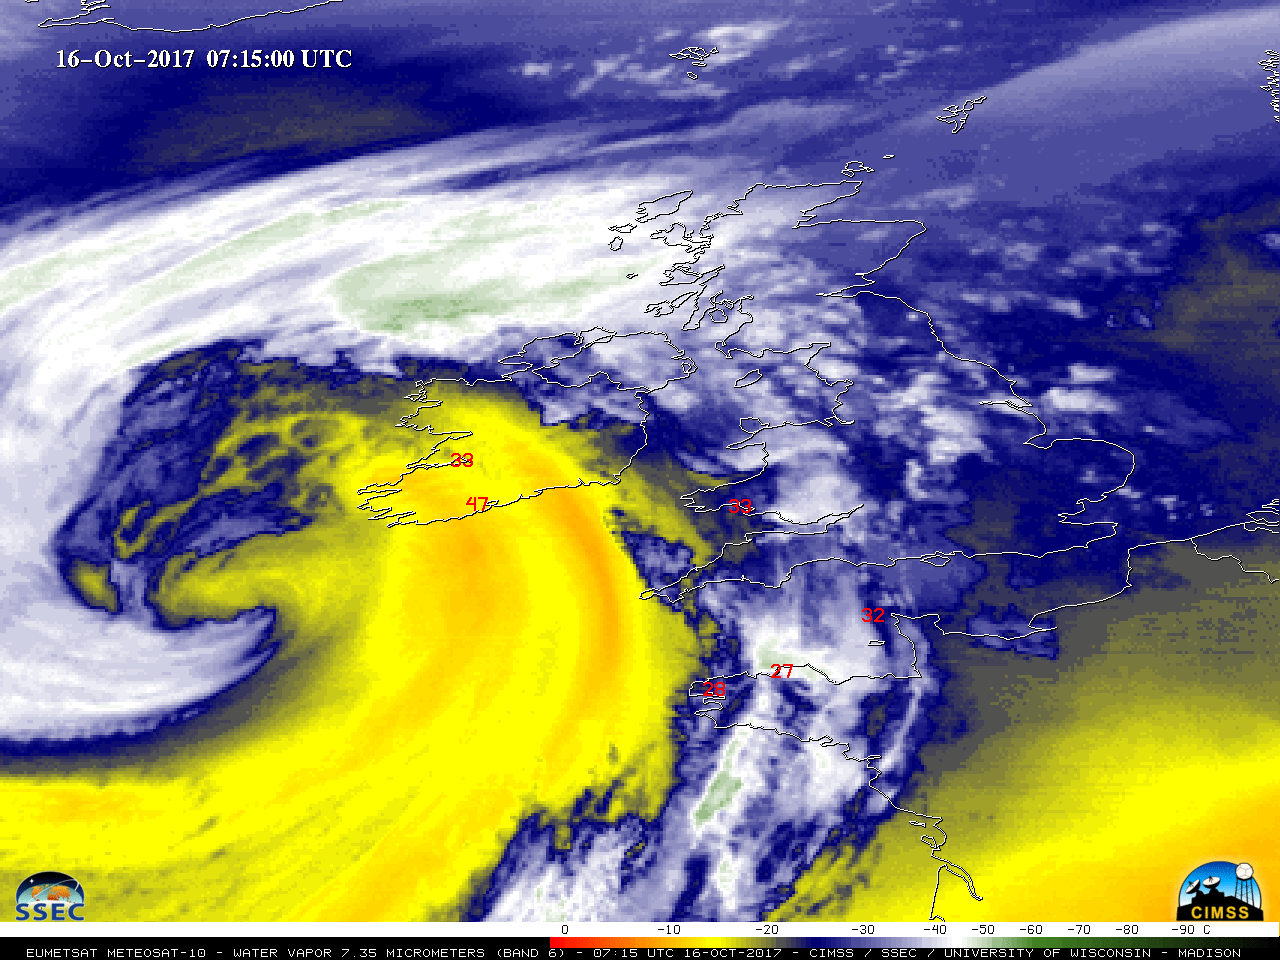 Meteosat-10 Water Vapor (7.35 µm) images, with hourly surface wind gusts (knots) plotted in red [click to play MP4 animation]